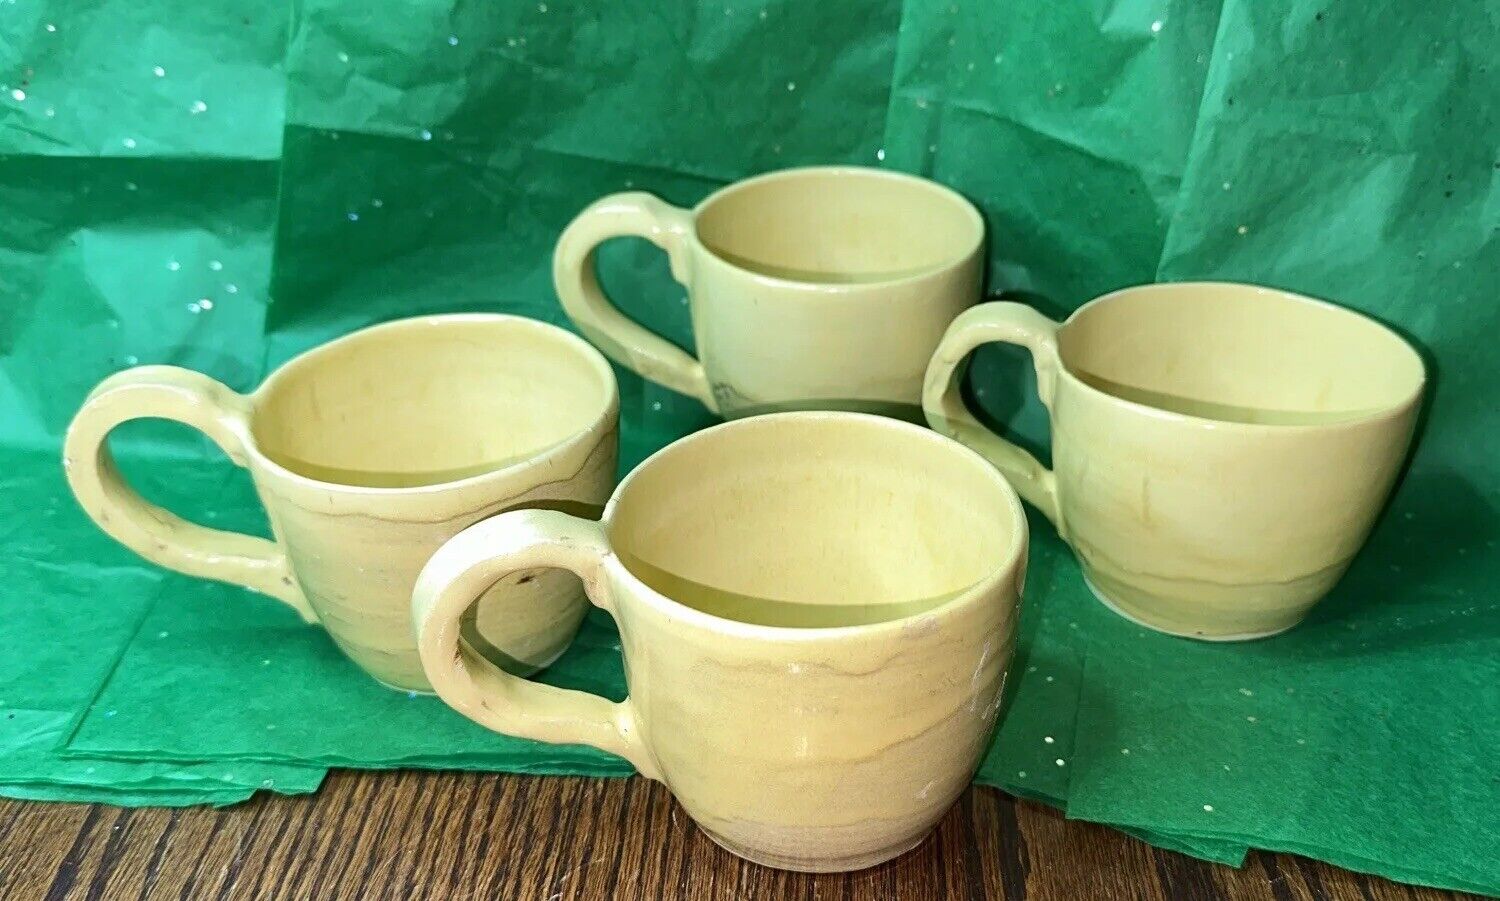 4x Hand thrown Yellow Glazed Tea/Coffee Cups Porcelain Stoneware Signed Handled